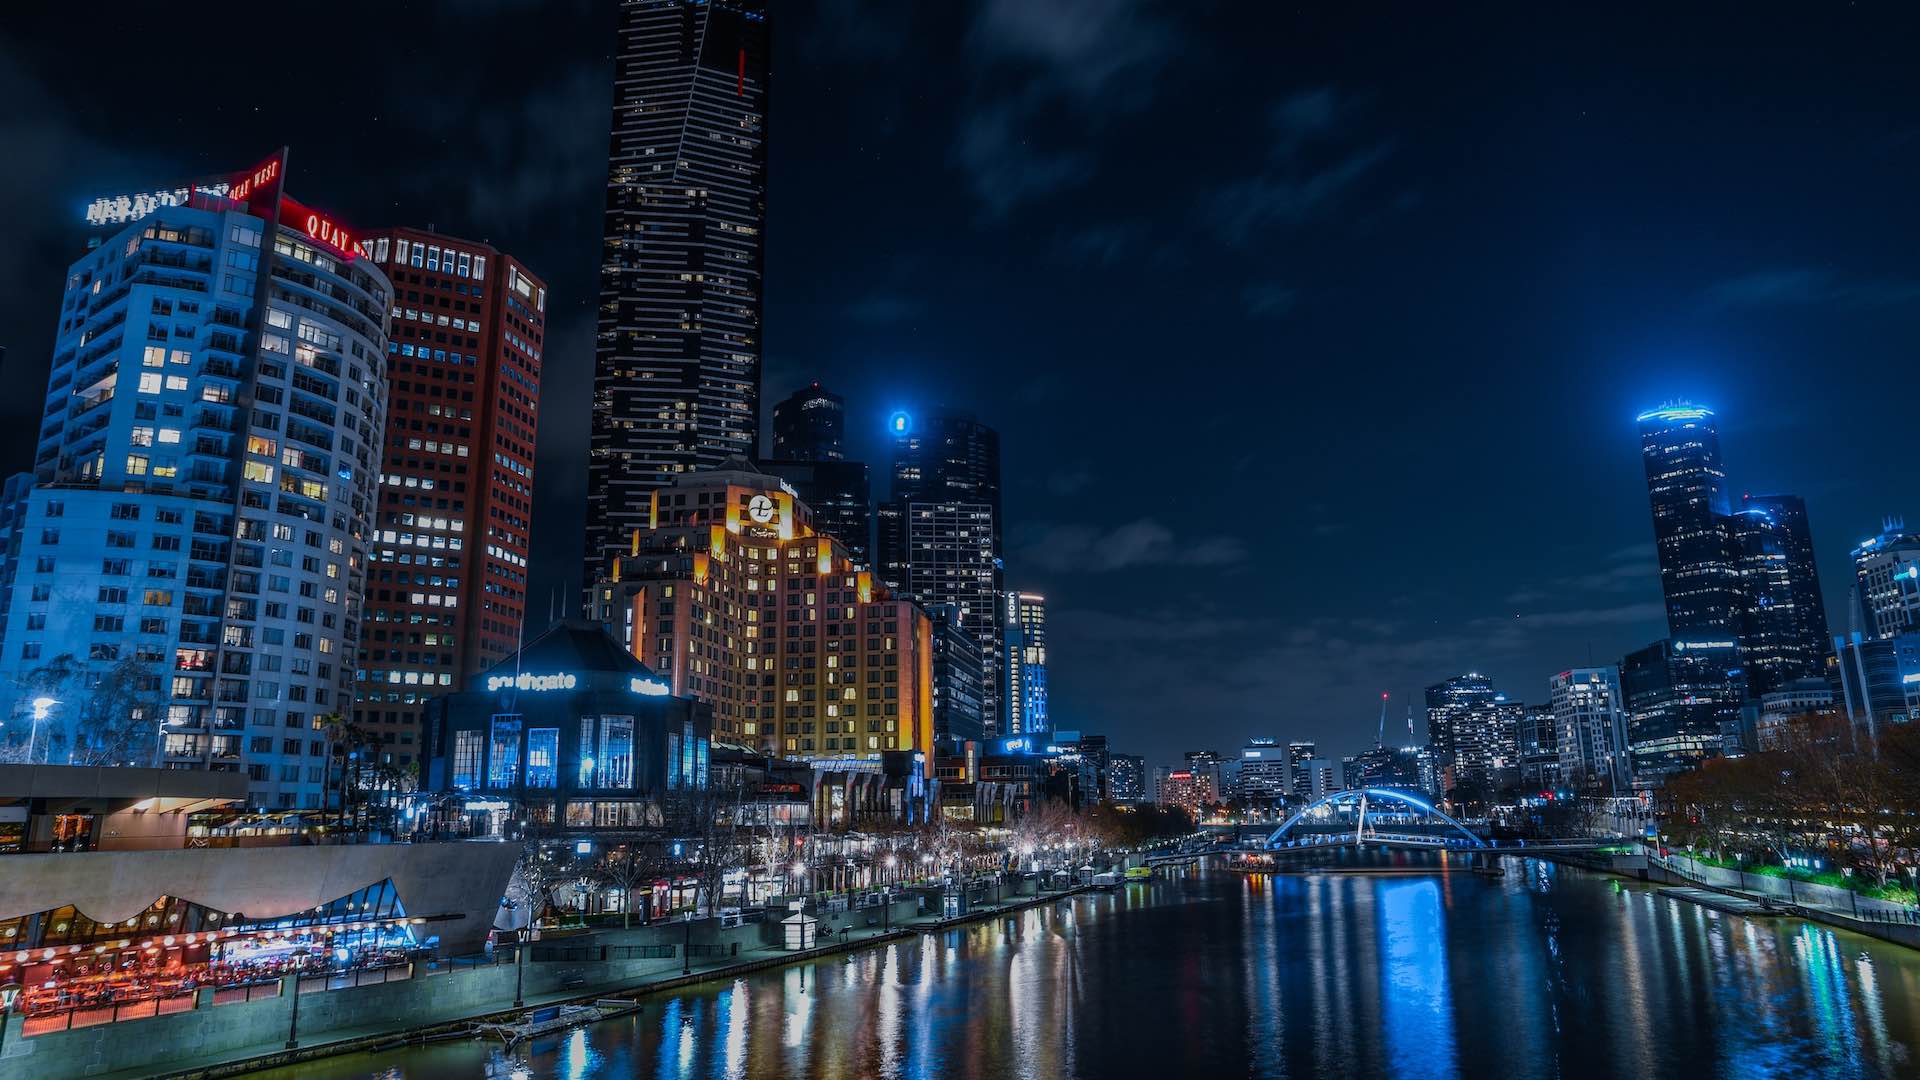 Melbourne's Most Photogenic After-Dark Spots for When You're Not Quite Ready to End Your Date